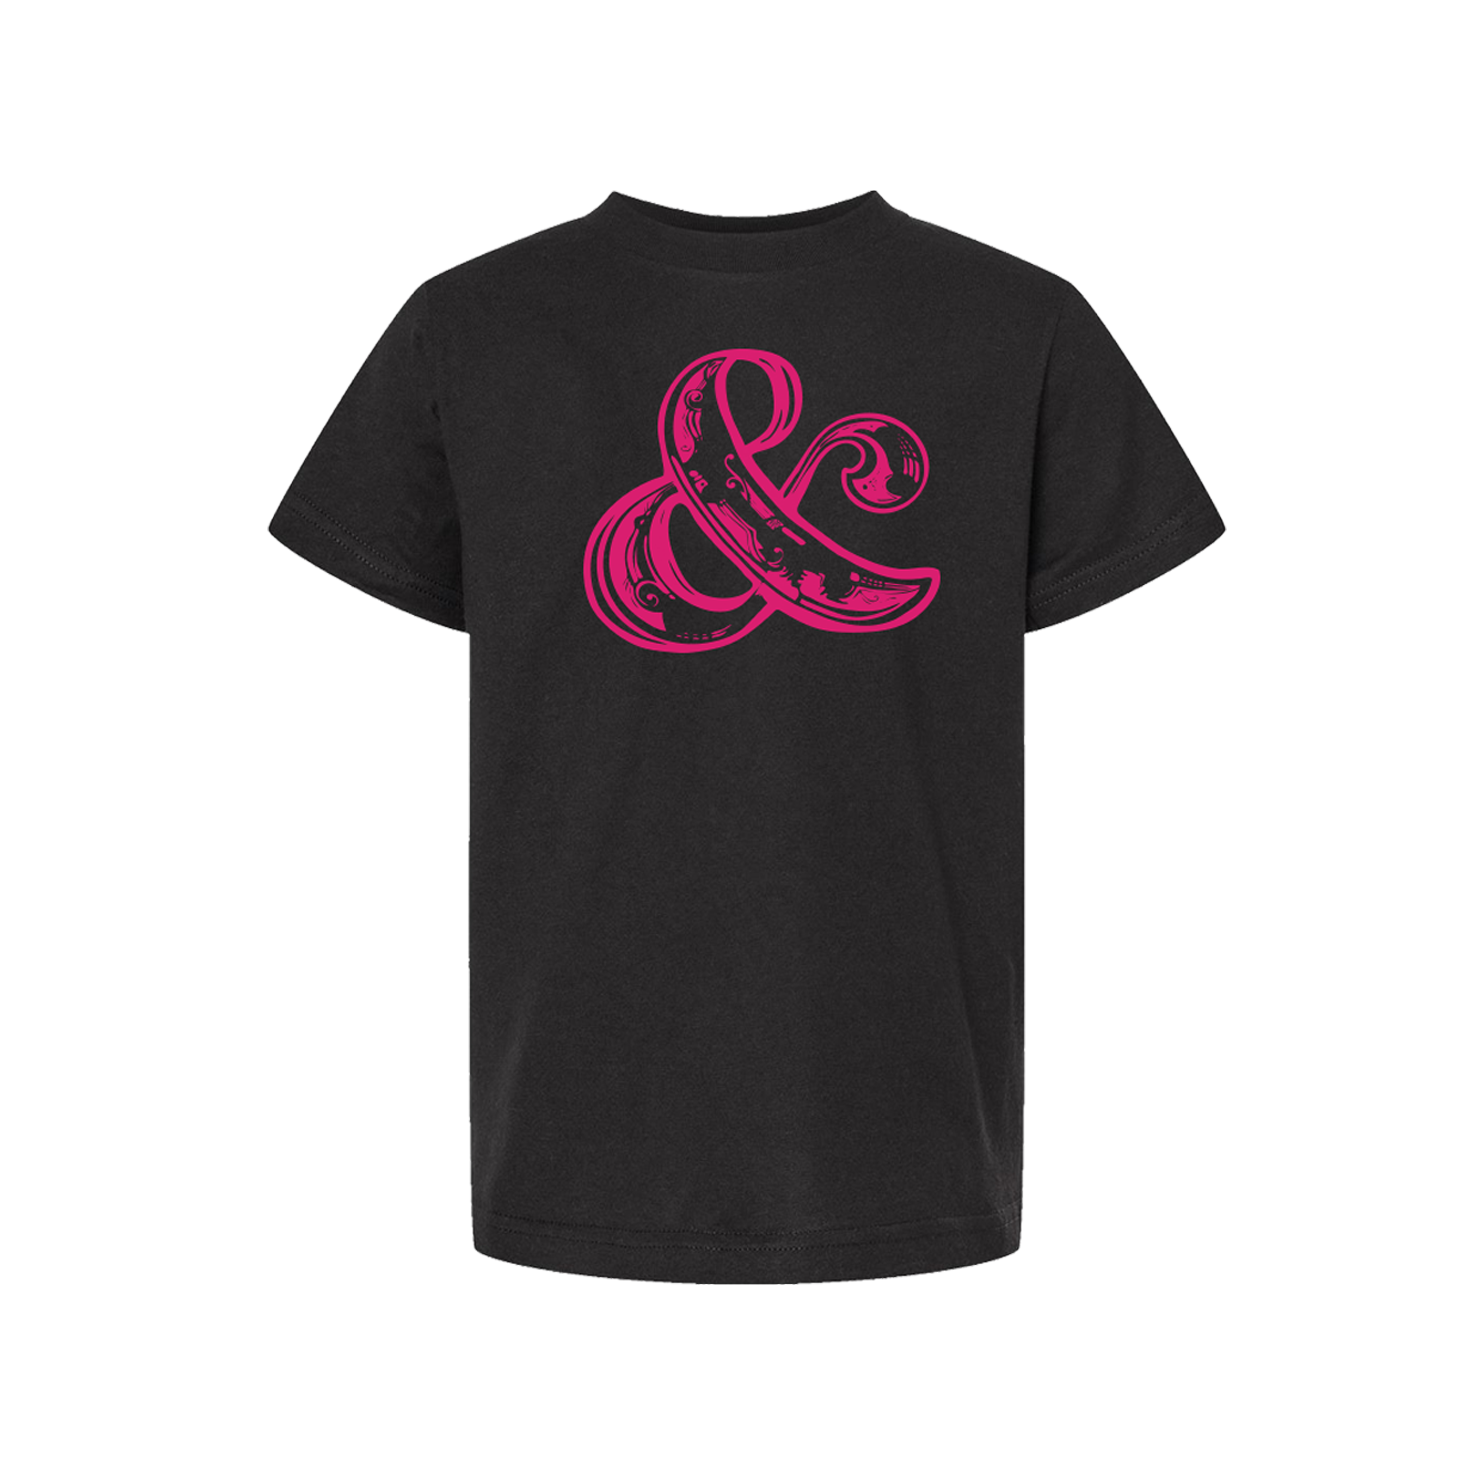 & JULIET Ampersand Youth Tee Image